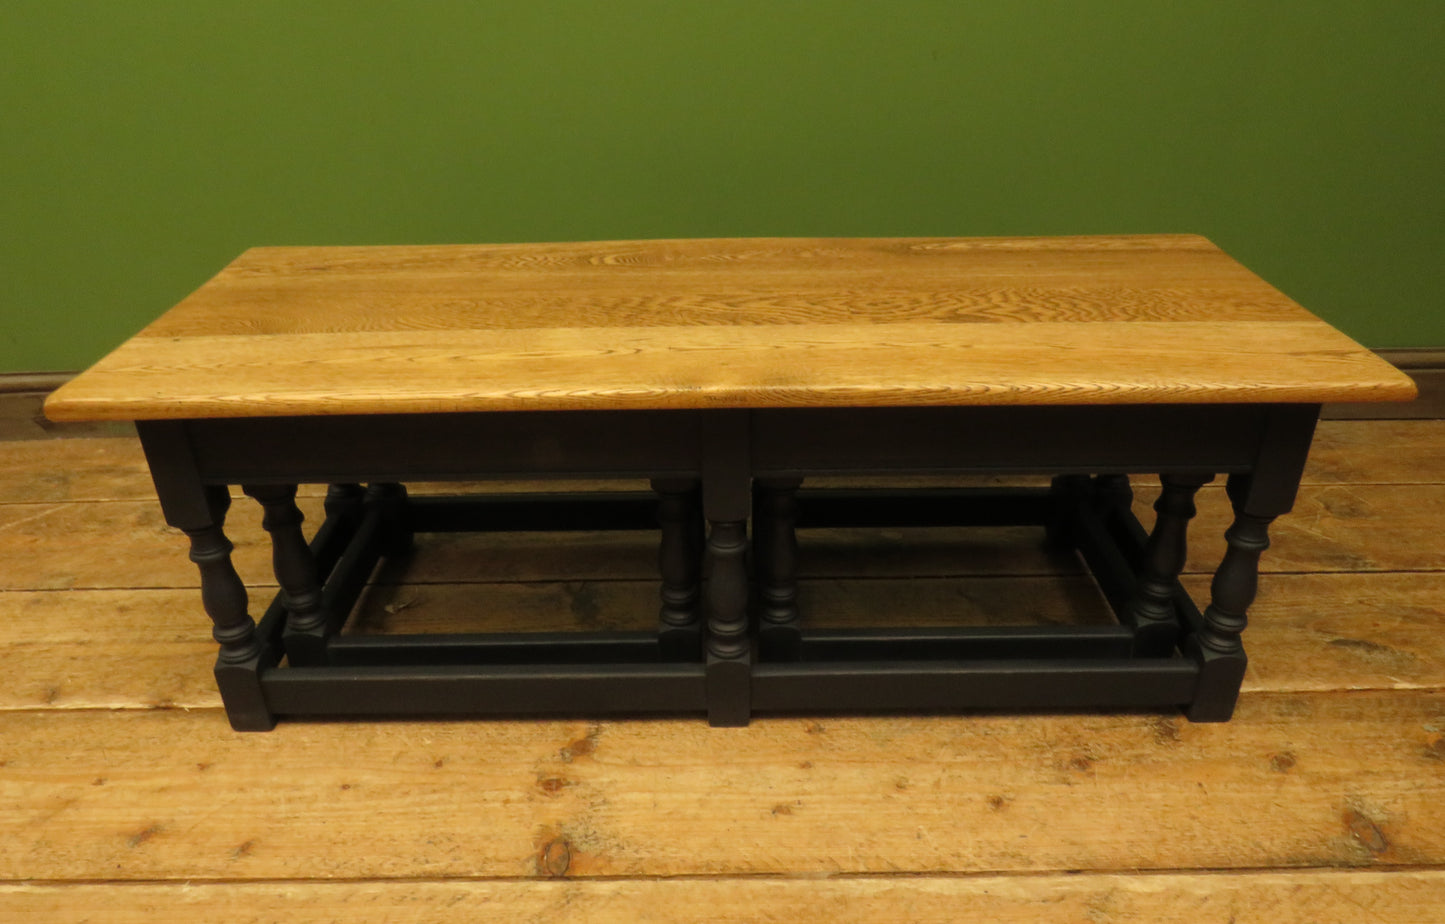 Vintage Nest of Tables with Black Bases and wooden tops